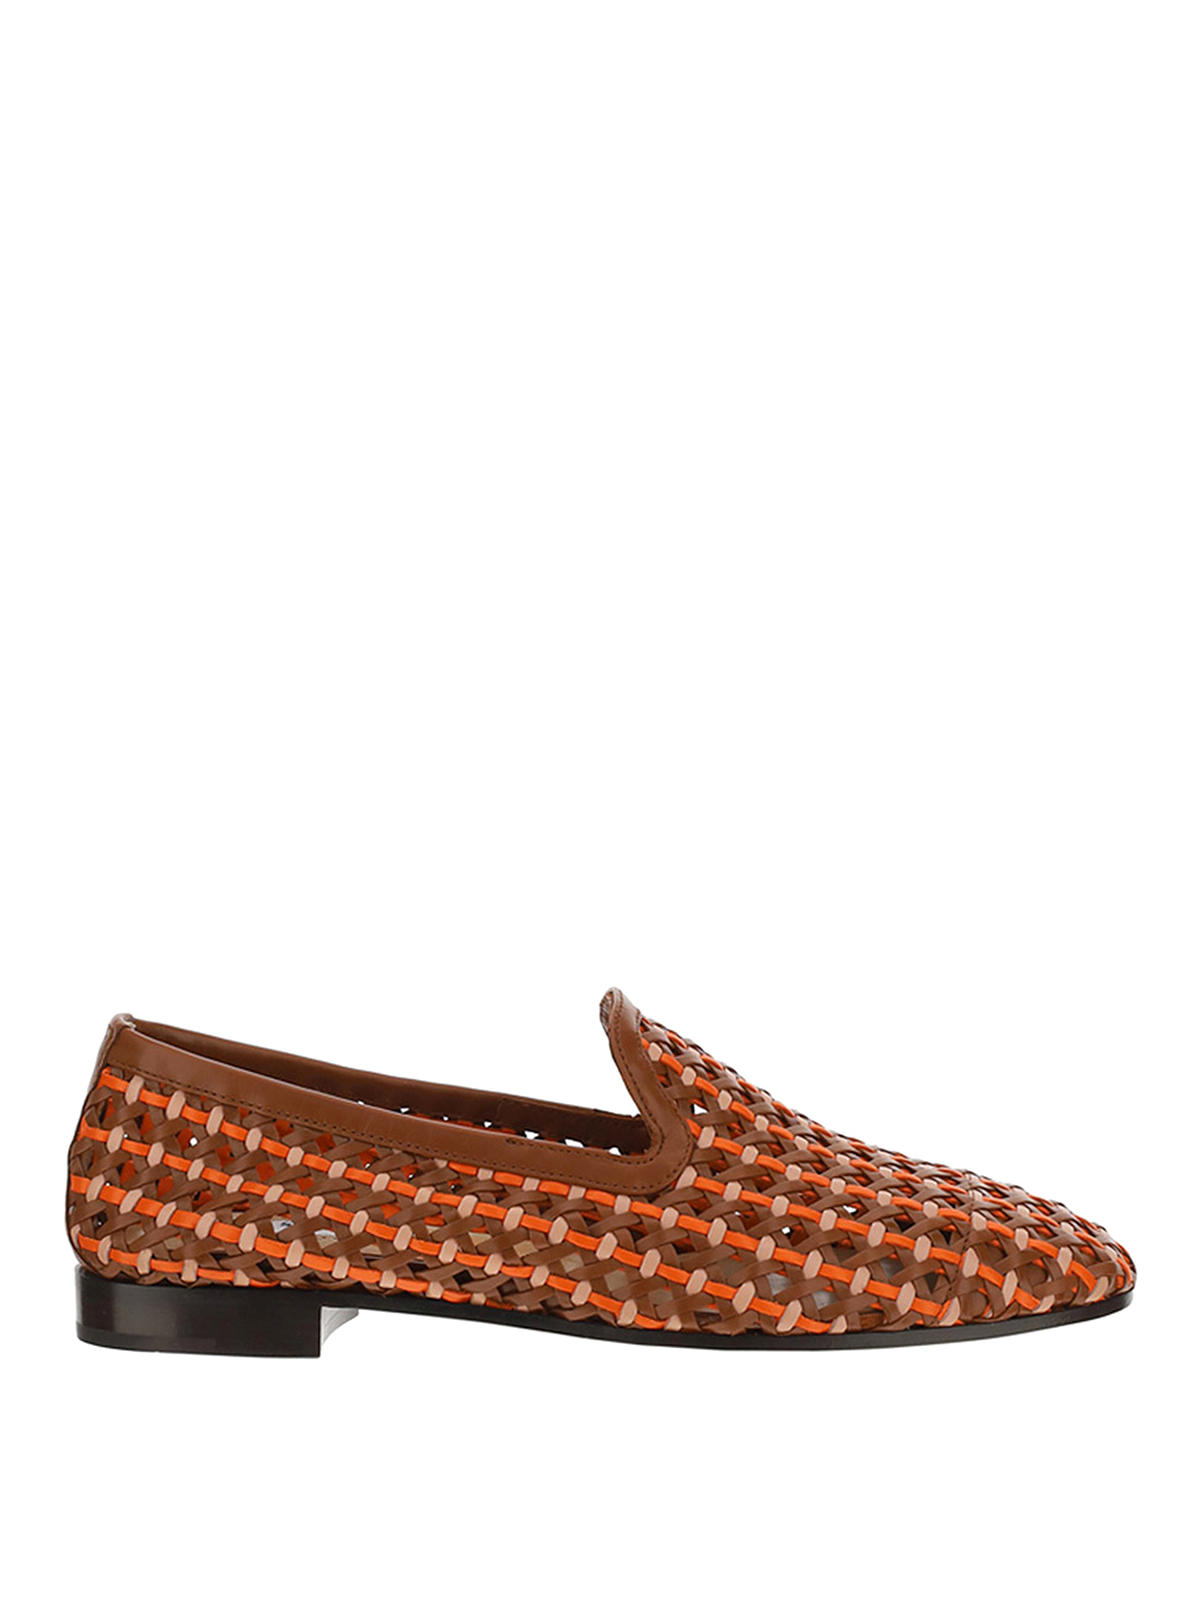 Loafers & Slippers Fratelli Rossetti - Woven leather slip-on shoes ...